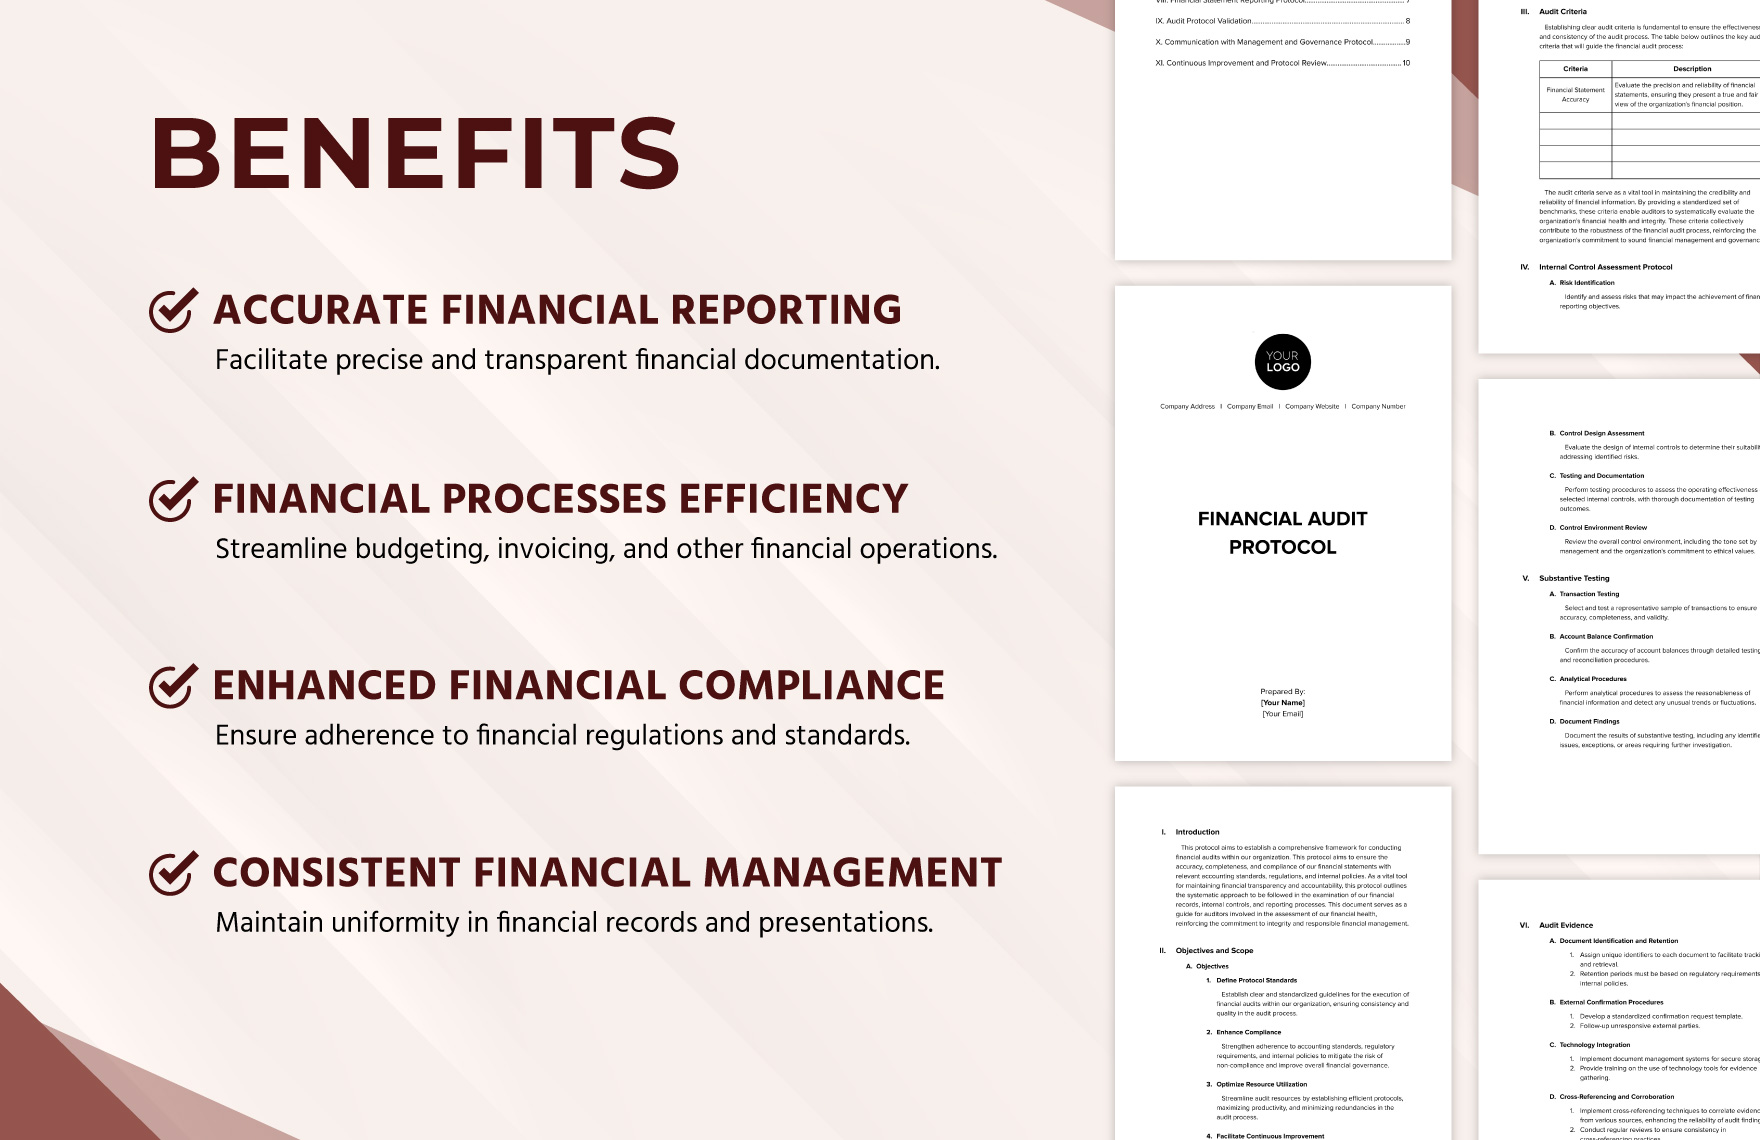 Financial Audit Protocol Template